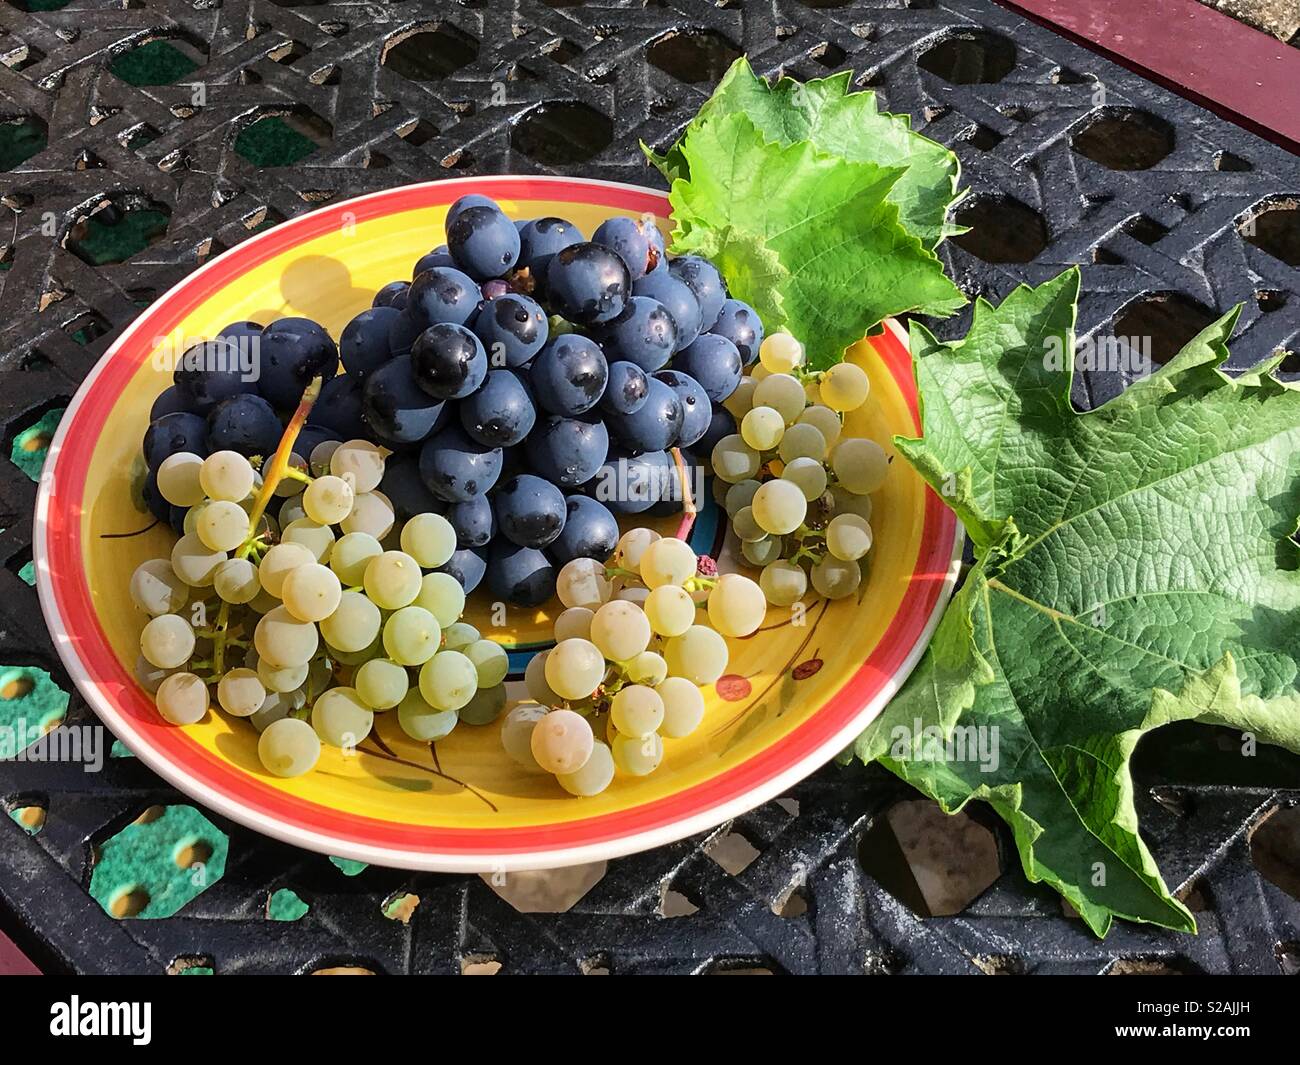 Black and green grapes on plate with vine leaves Stock Photo